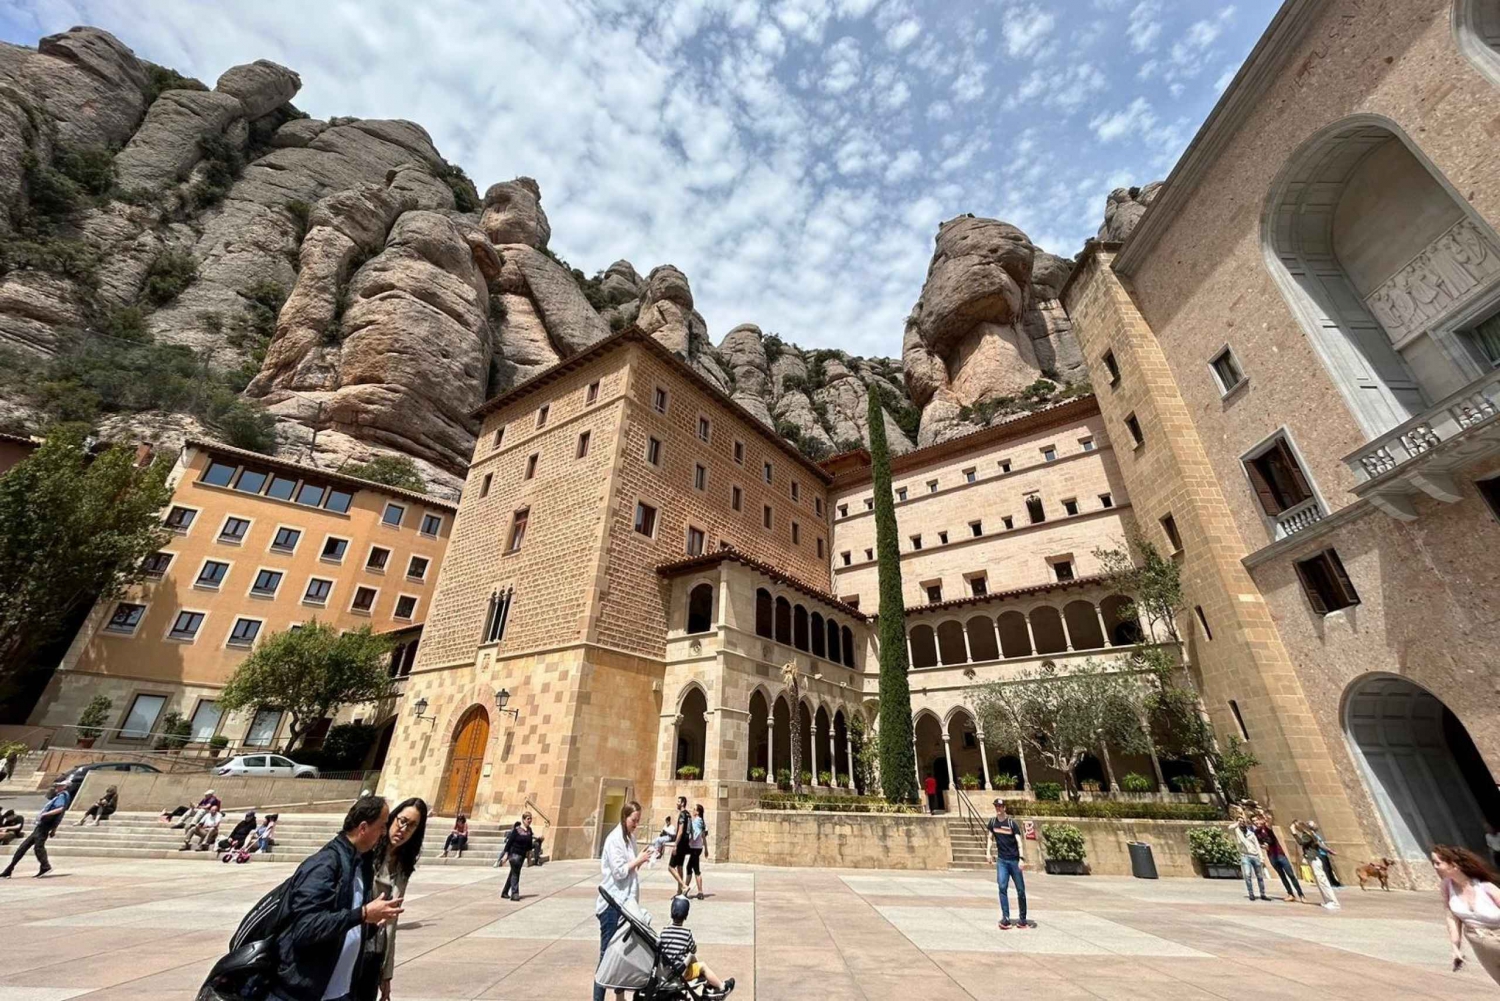 From Barcelona: Guided Tour & Tickets to Montserrat